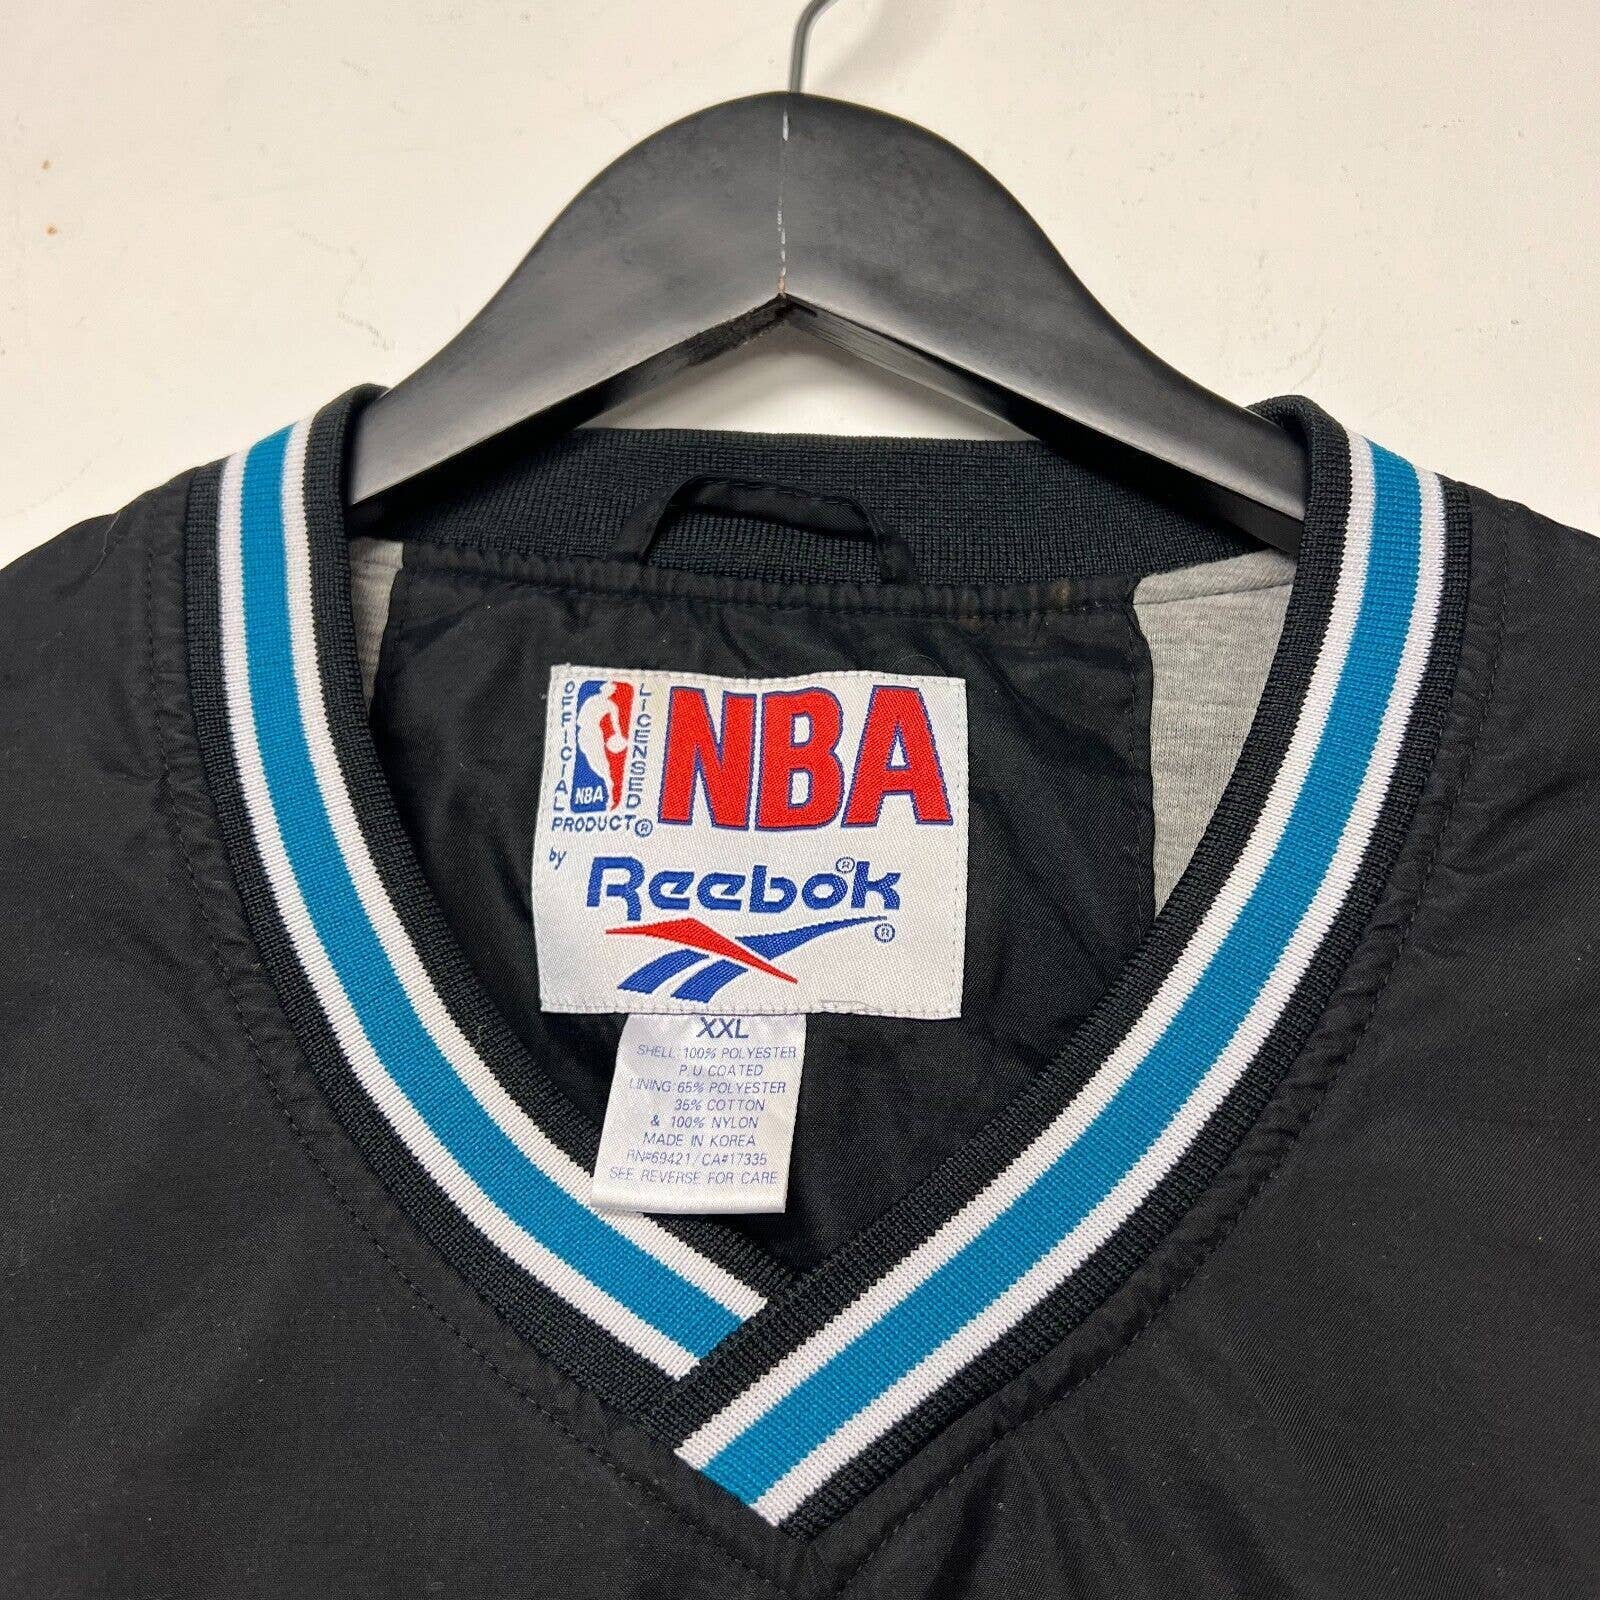 NBA Pistons Pullover Size 2XL